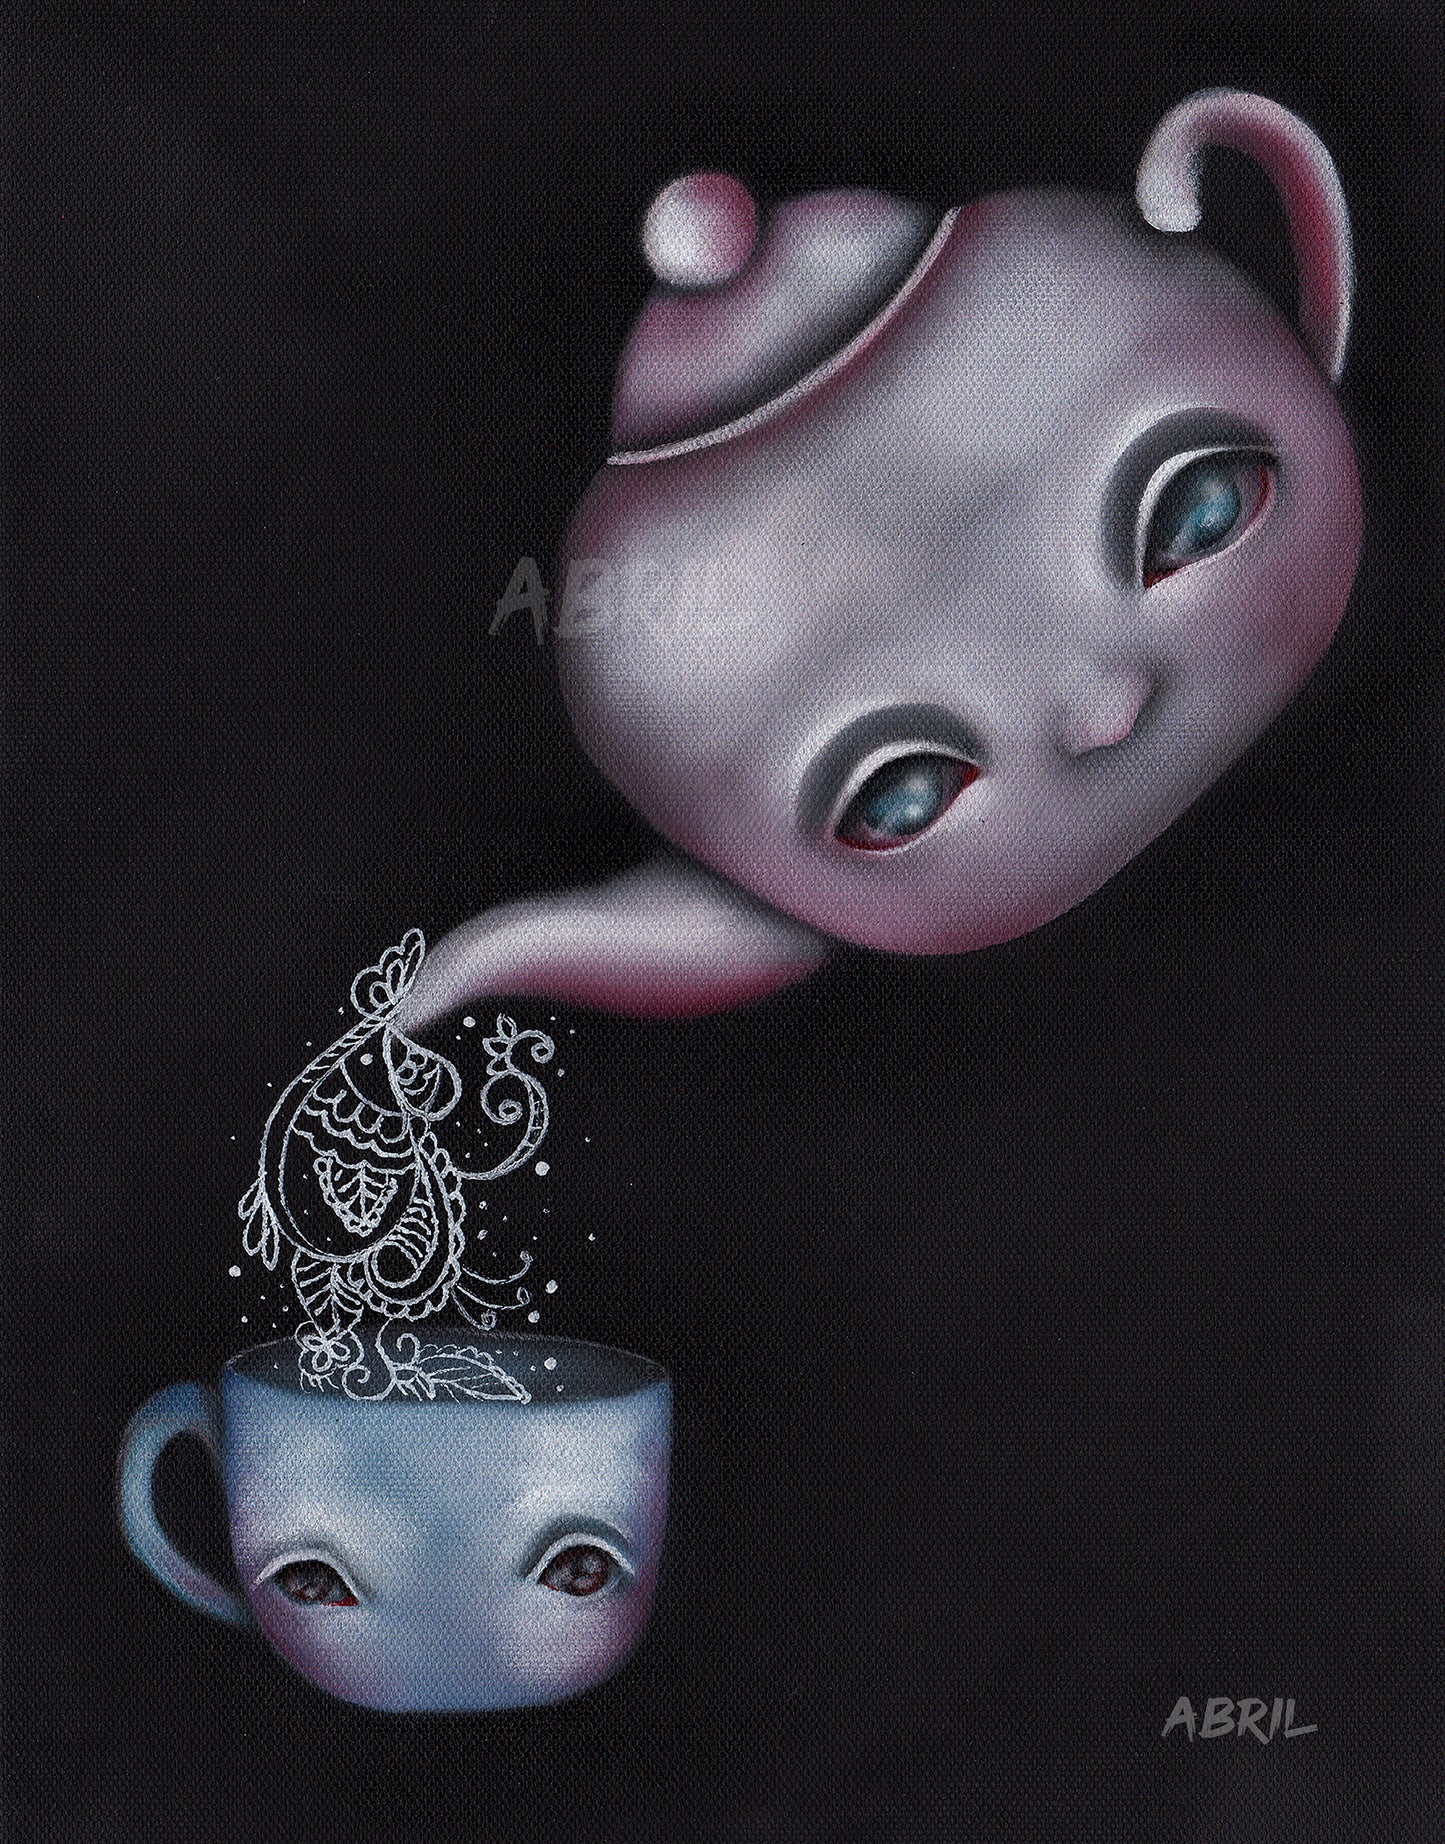 Tea for one - 8x10" Signed Print